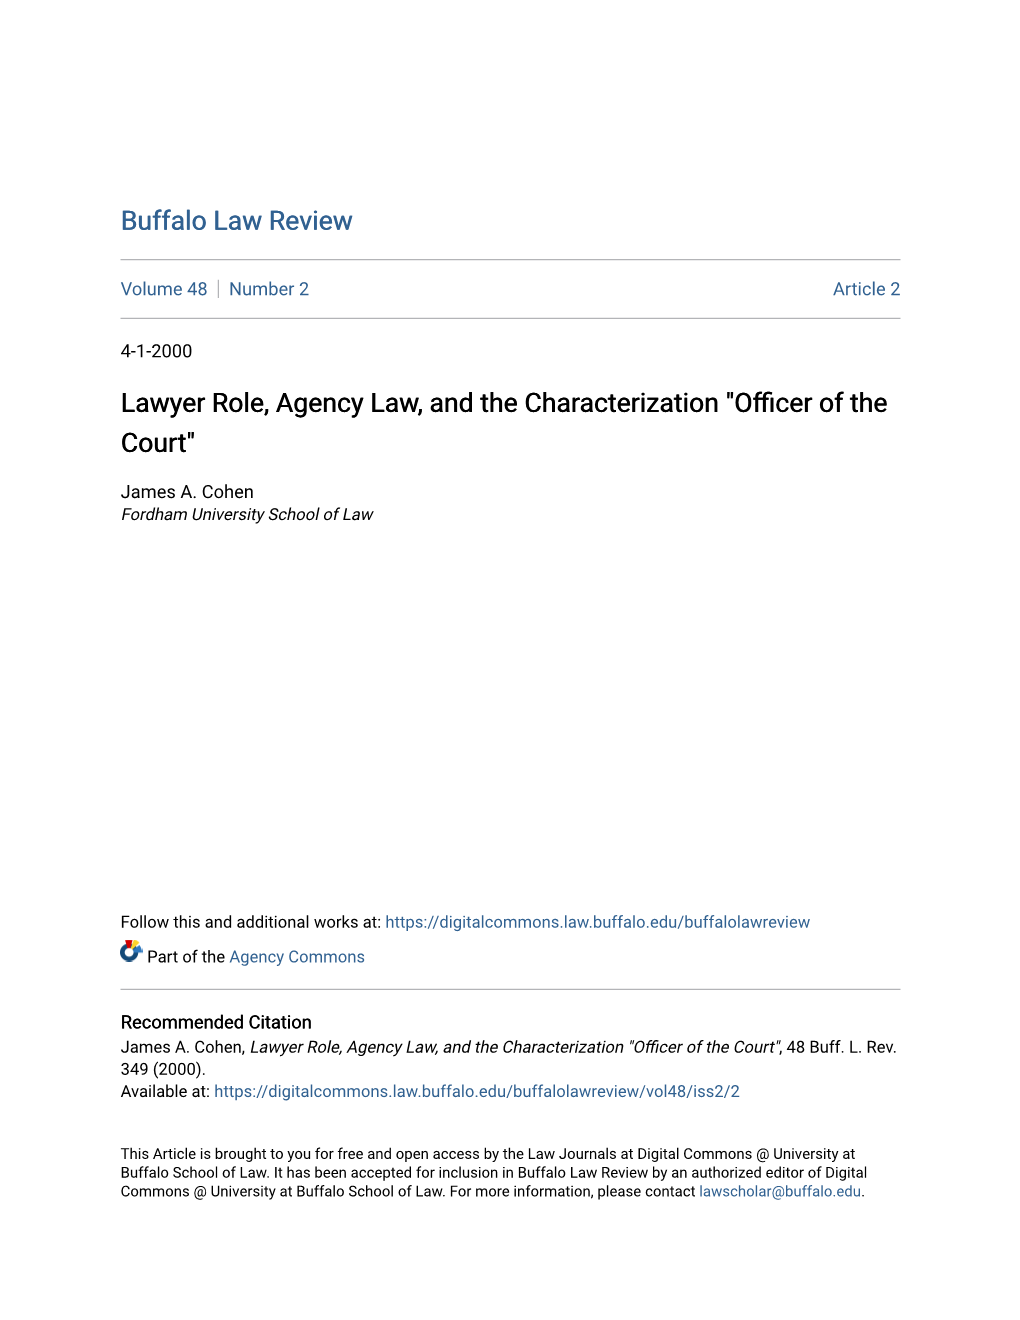 Lawyer Role, Agency Law, and the Characterization "Officer of the Court"